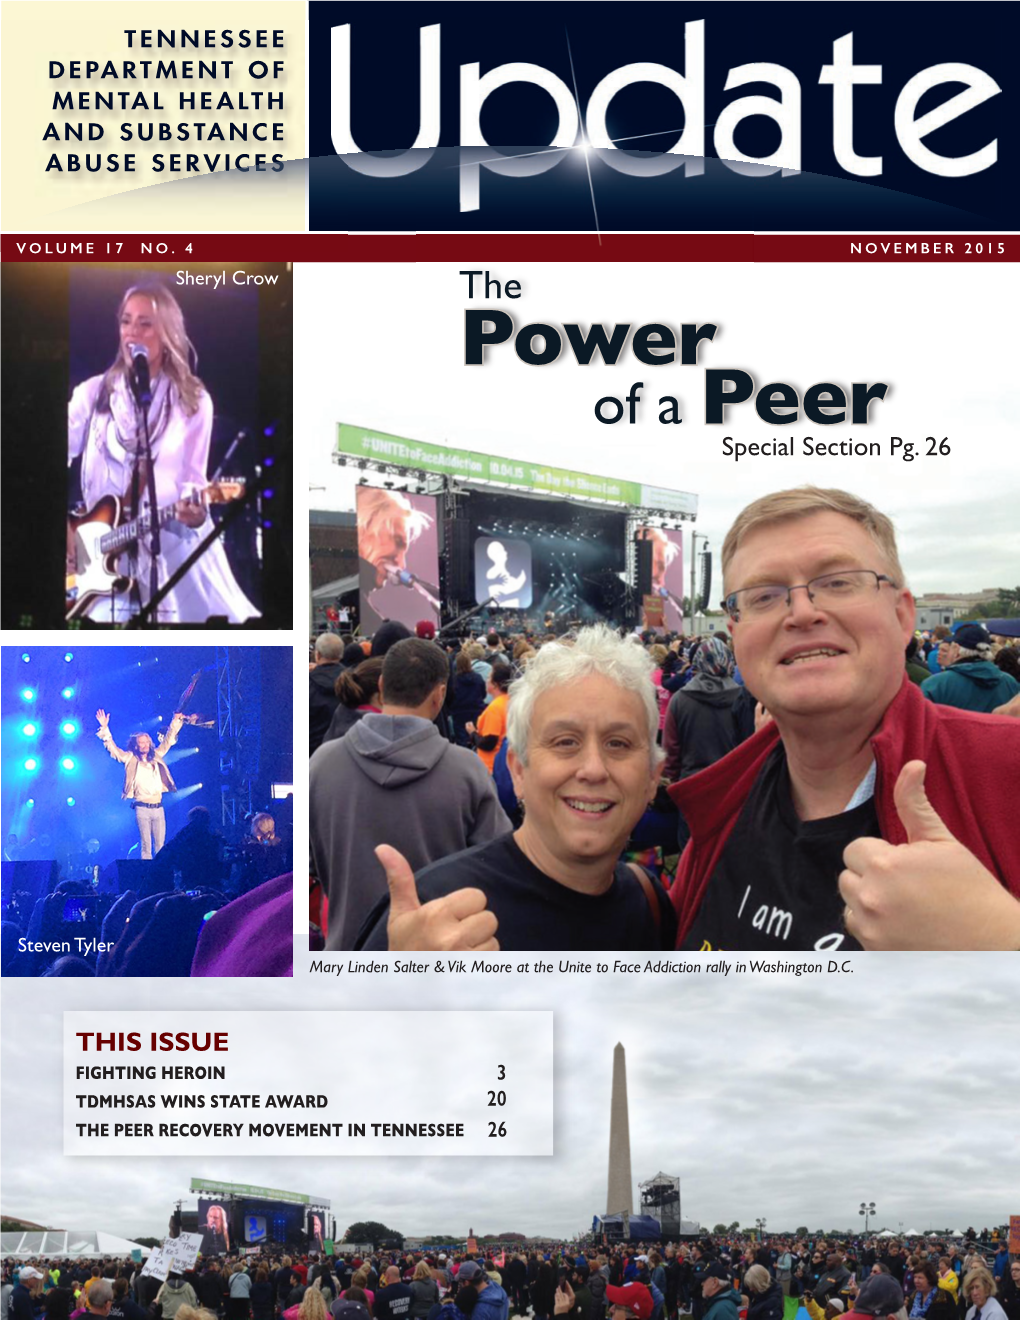 NOVEMBER 2015 Sheryl Crow the Power of a Peerspecial Section Pg